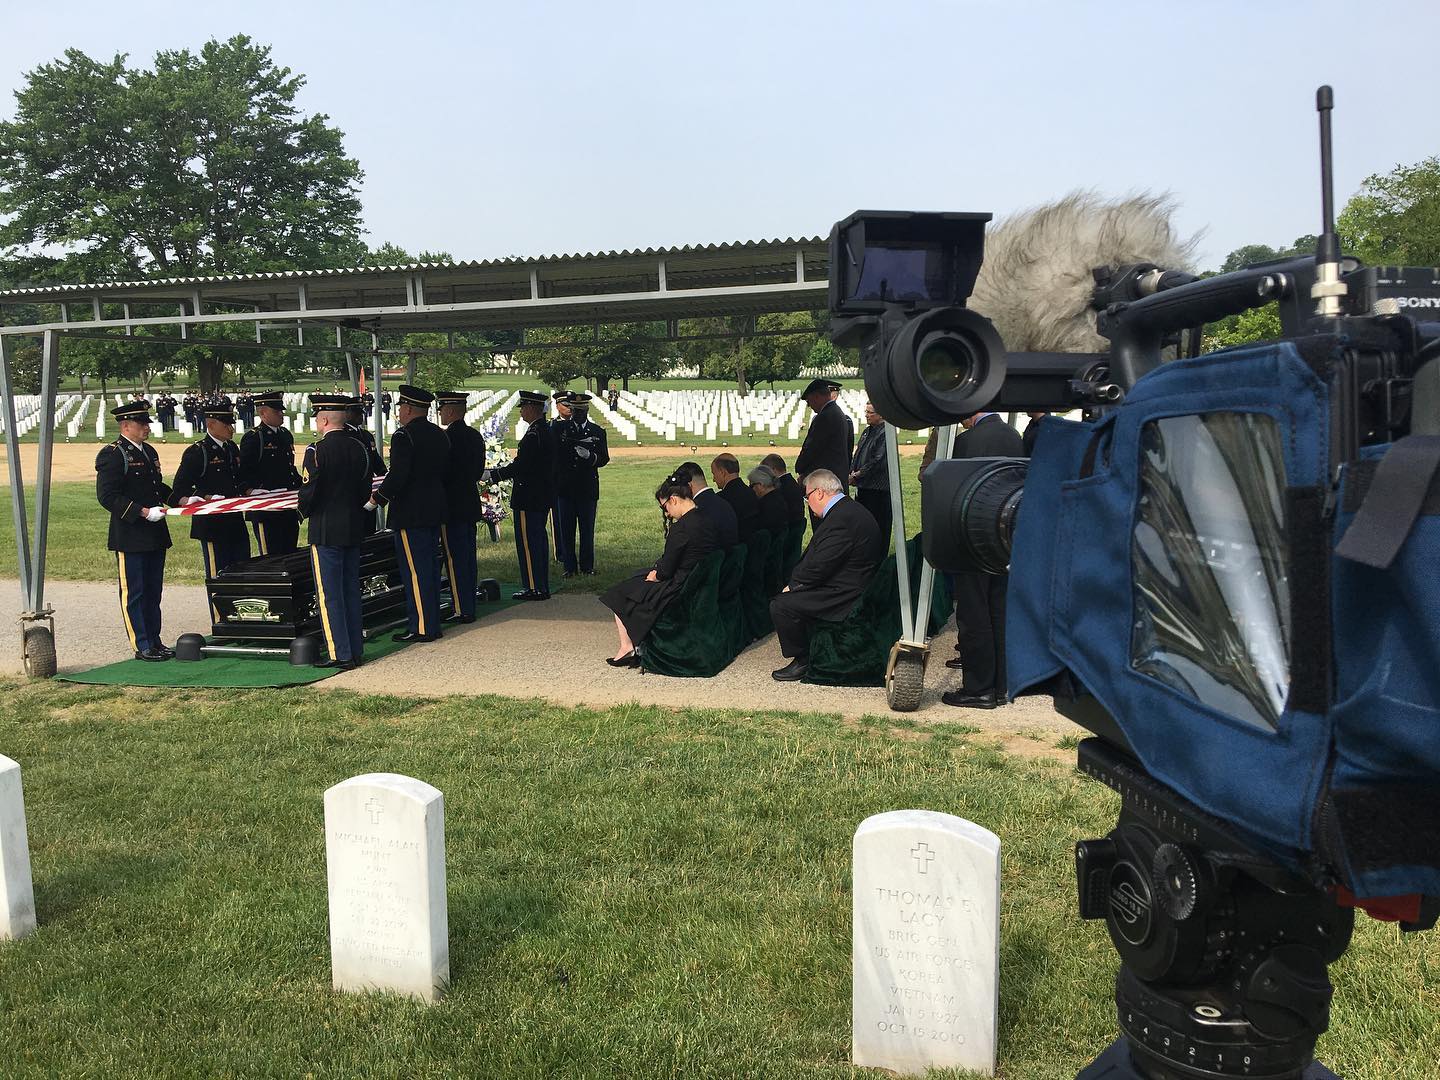 My office today. With the @usarmy @usarmyoldguard Charlie Company in section 55 at Arlington. 
#Arlington⠀
#ArlingtonMedia⠀
#ArlingtonCemetery⠀
#ArlingtonNationalCemetery⠀